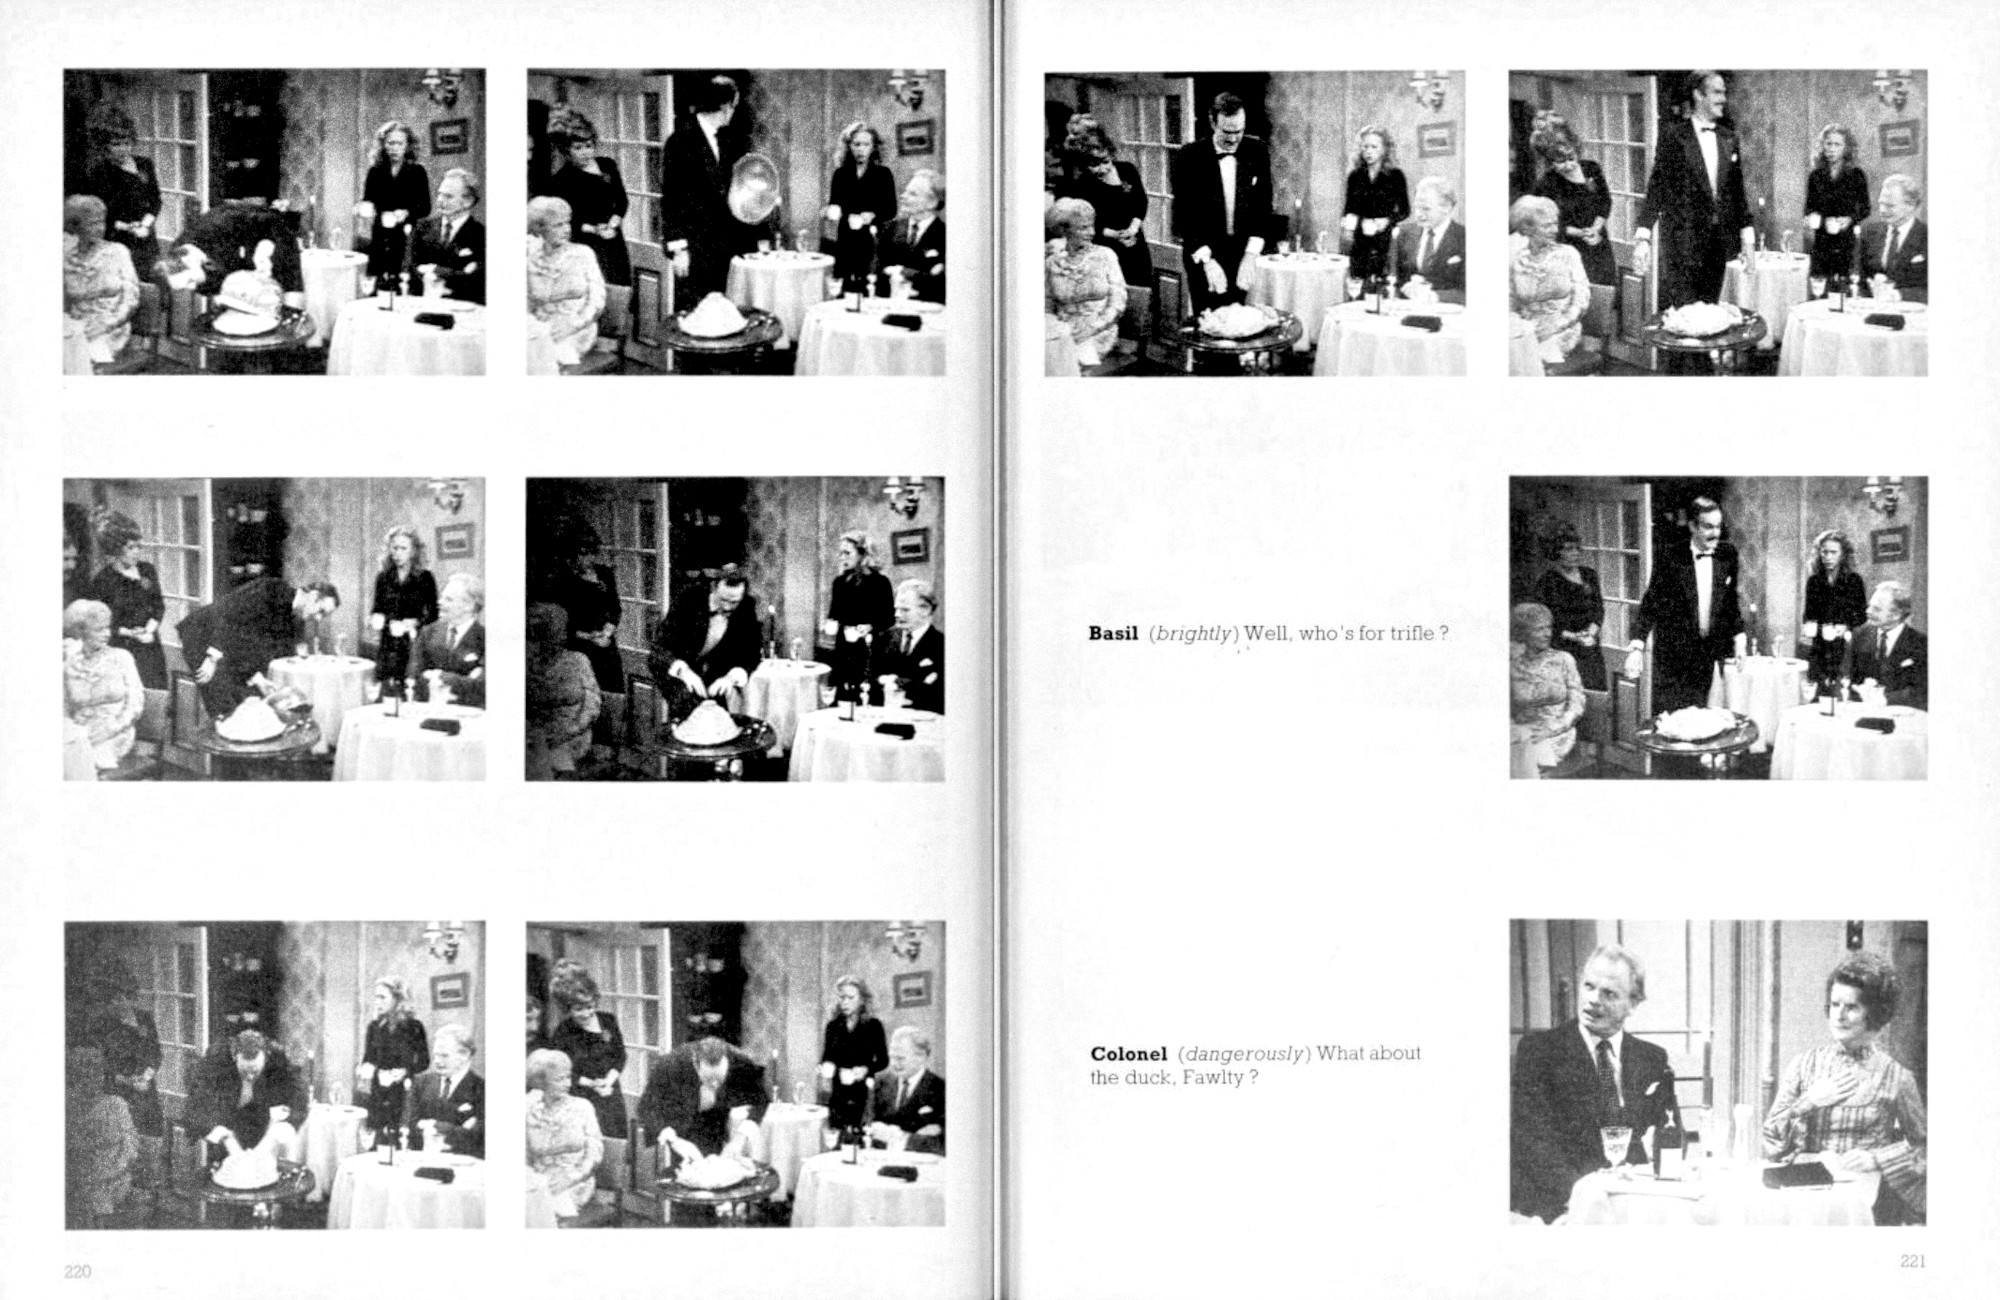 Picture of the final scene of the script book for Gourmet Night - showing lots of screengrabs of the scene, but no stage directions